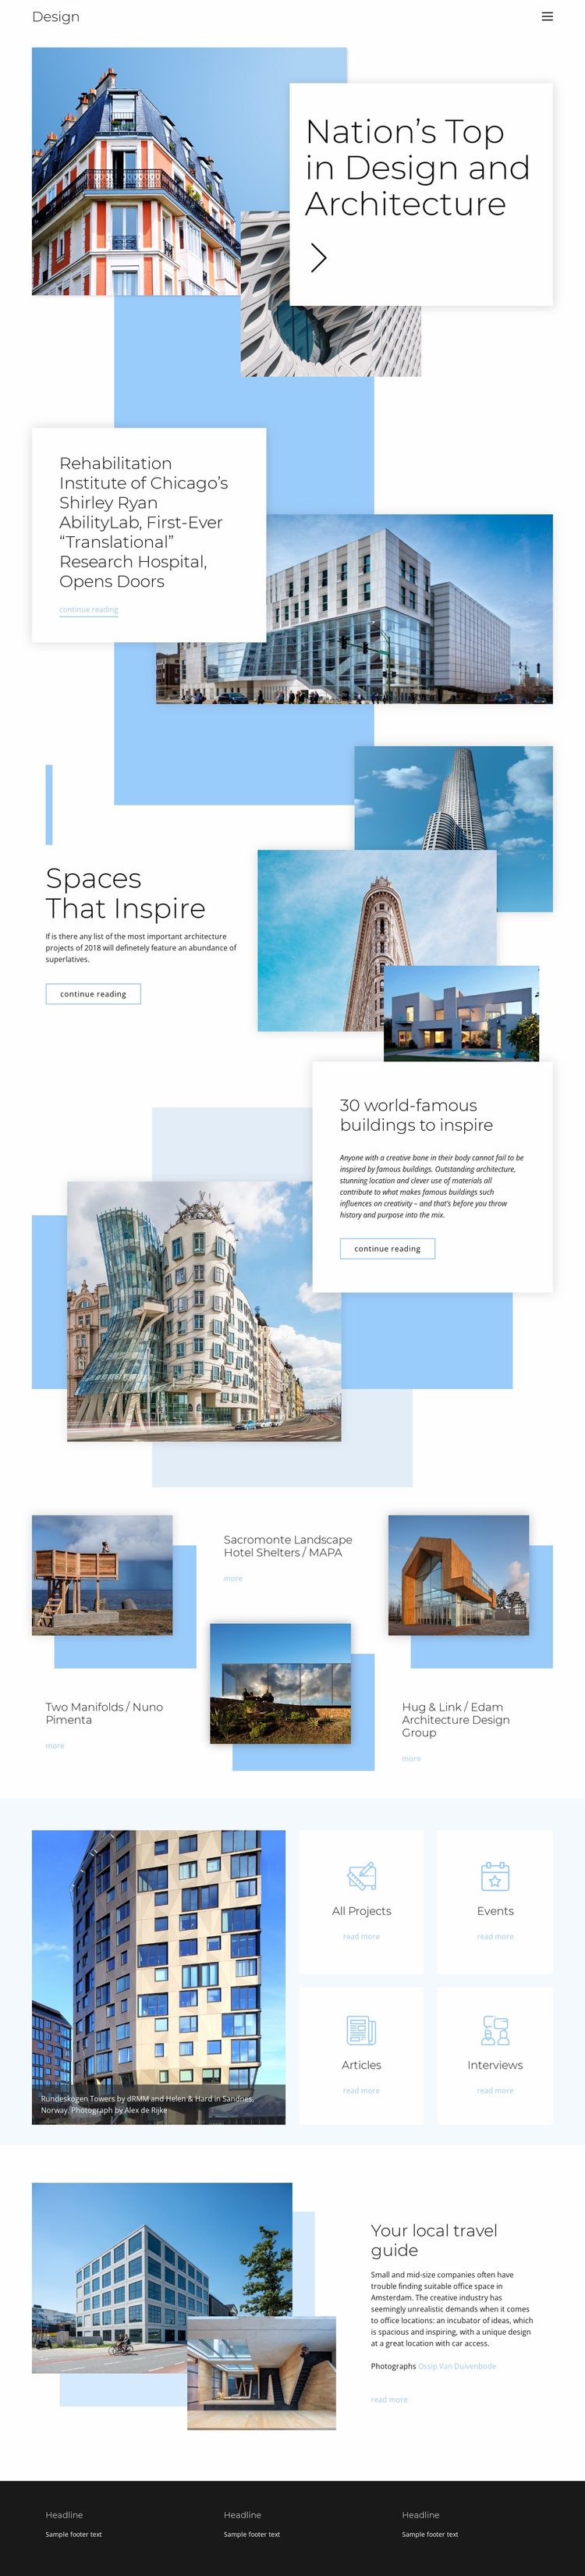 Rating for architecture Website Design